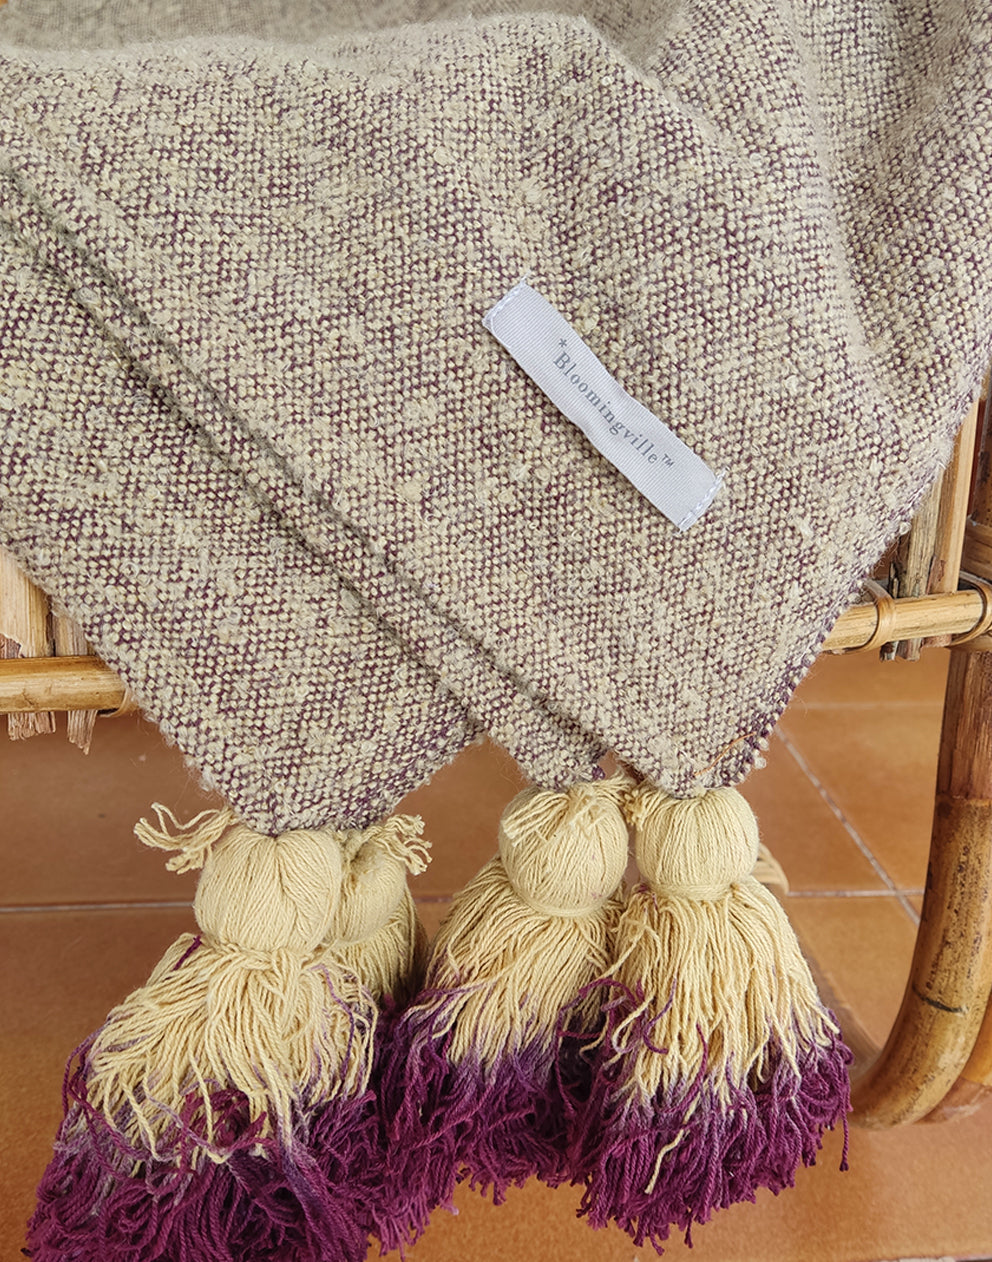 Bohemian Style Pale Yellow Neutral Textured Throw with Extra Large Tassles